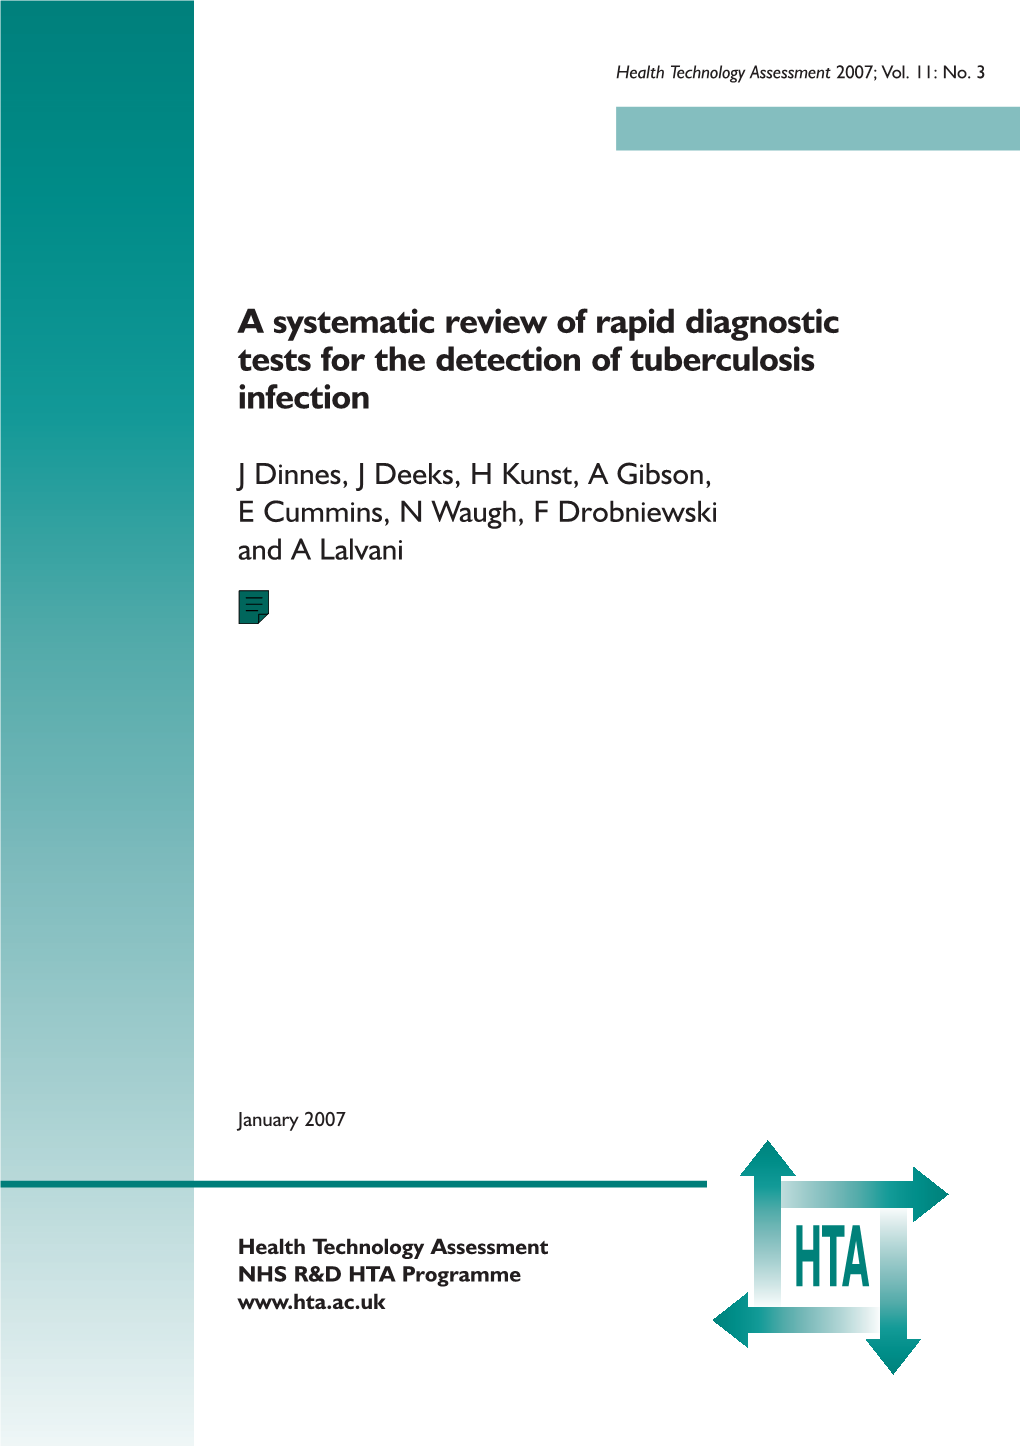 A Systematic Review of Rapid Diagnostic Tests for the Detection of Tuberculosis Infection